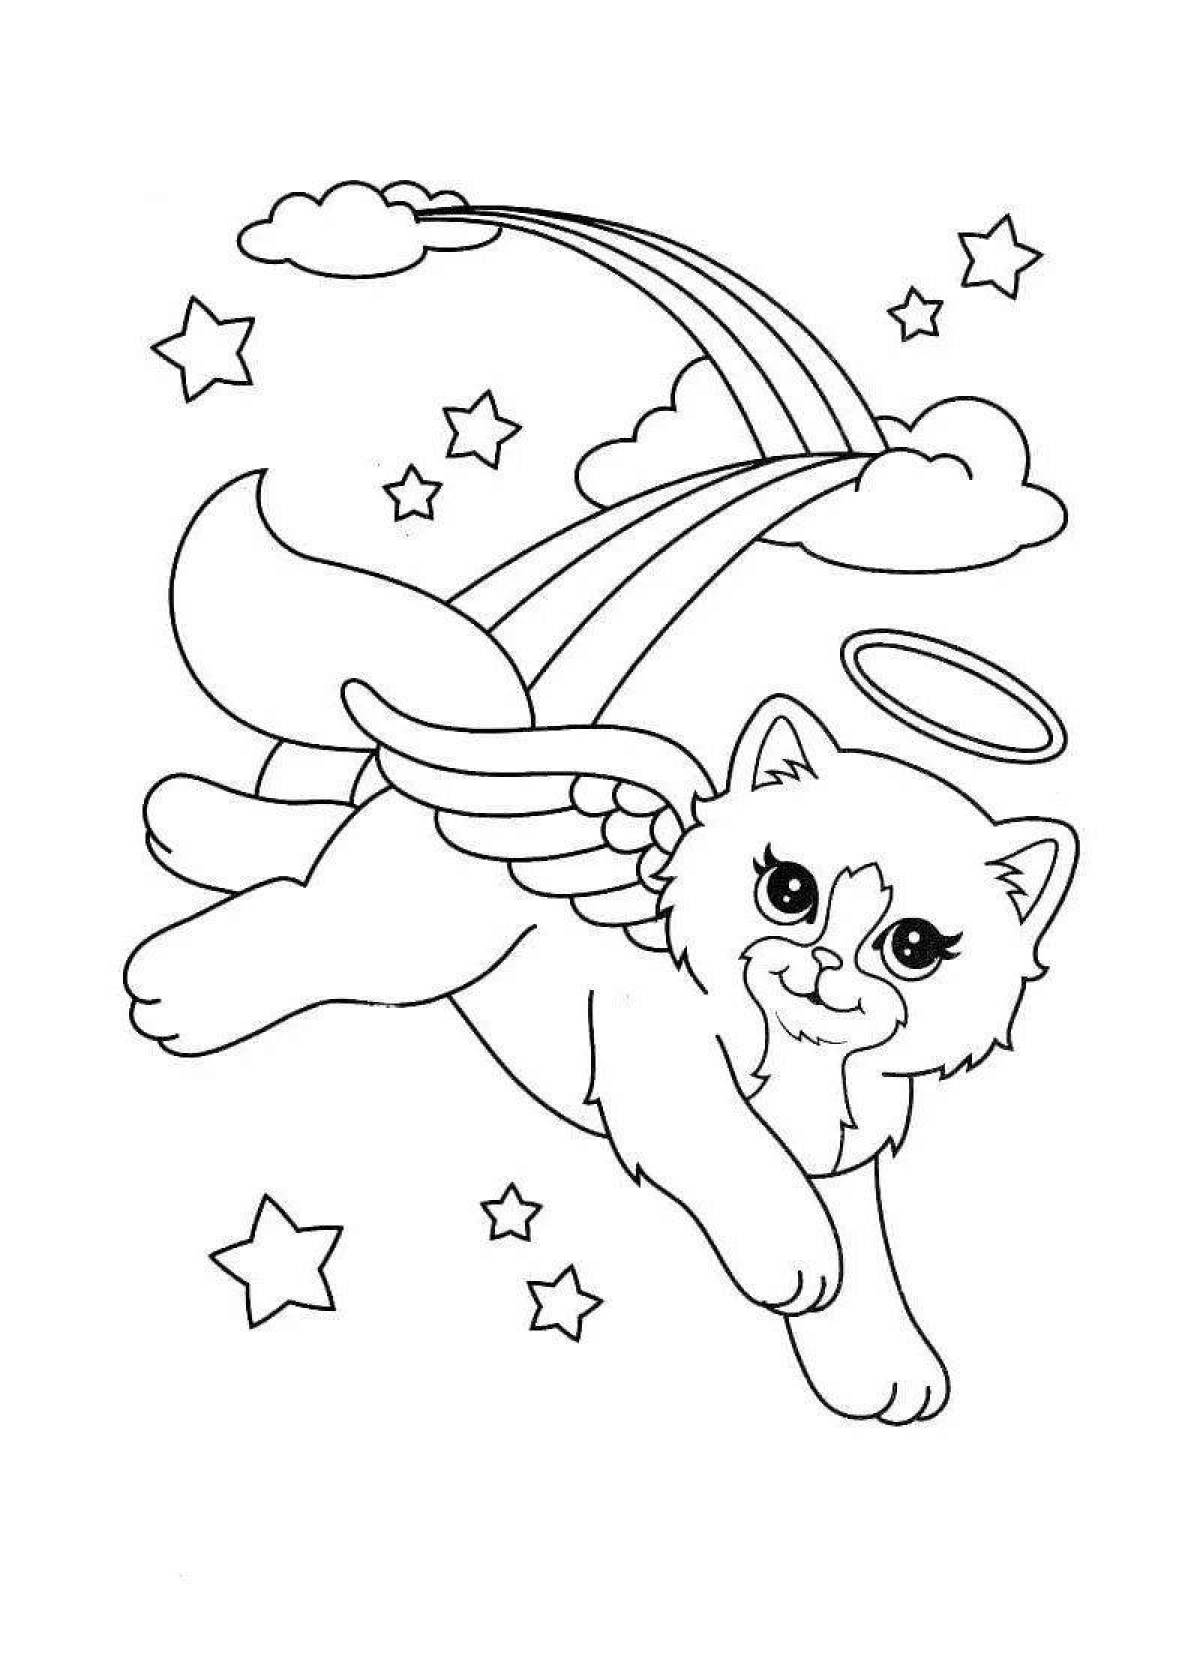 Flexible flying cat coloring page